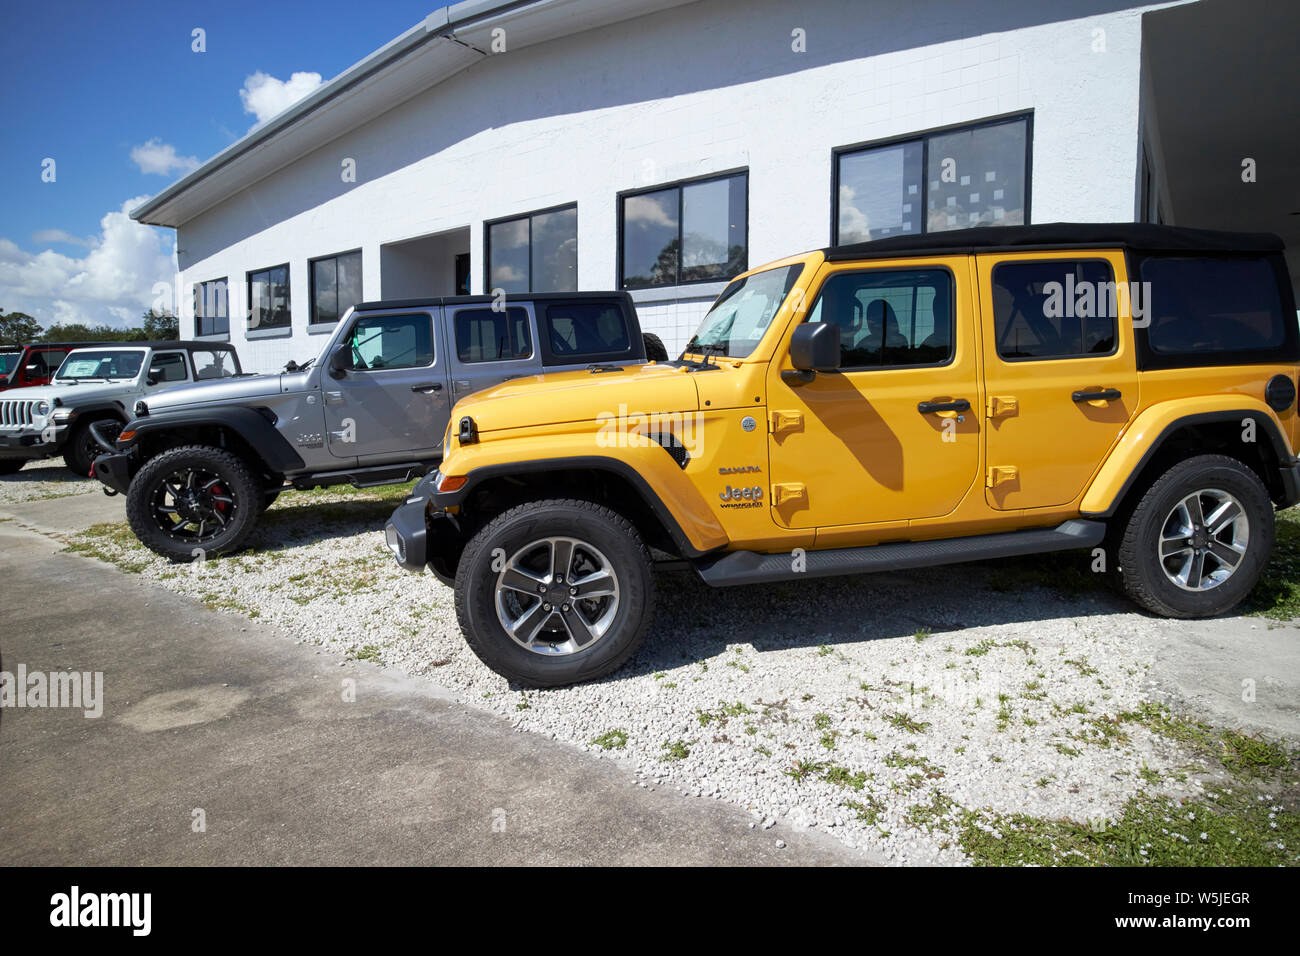 new jeep wrangler suvs for sale vehicles on a car sales lot in florida usa  united states of america Stock Photo - Alamy